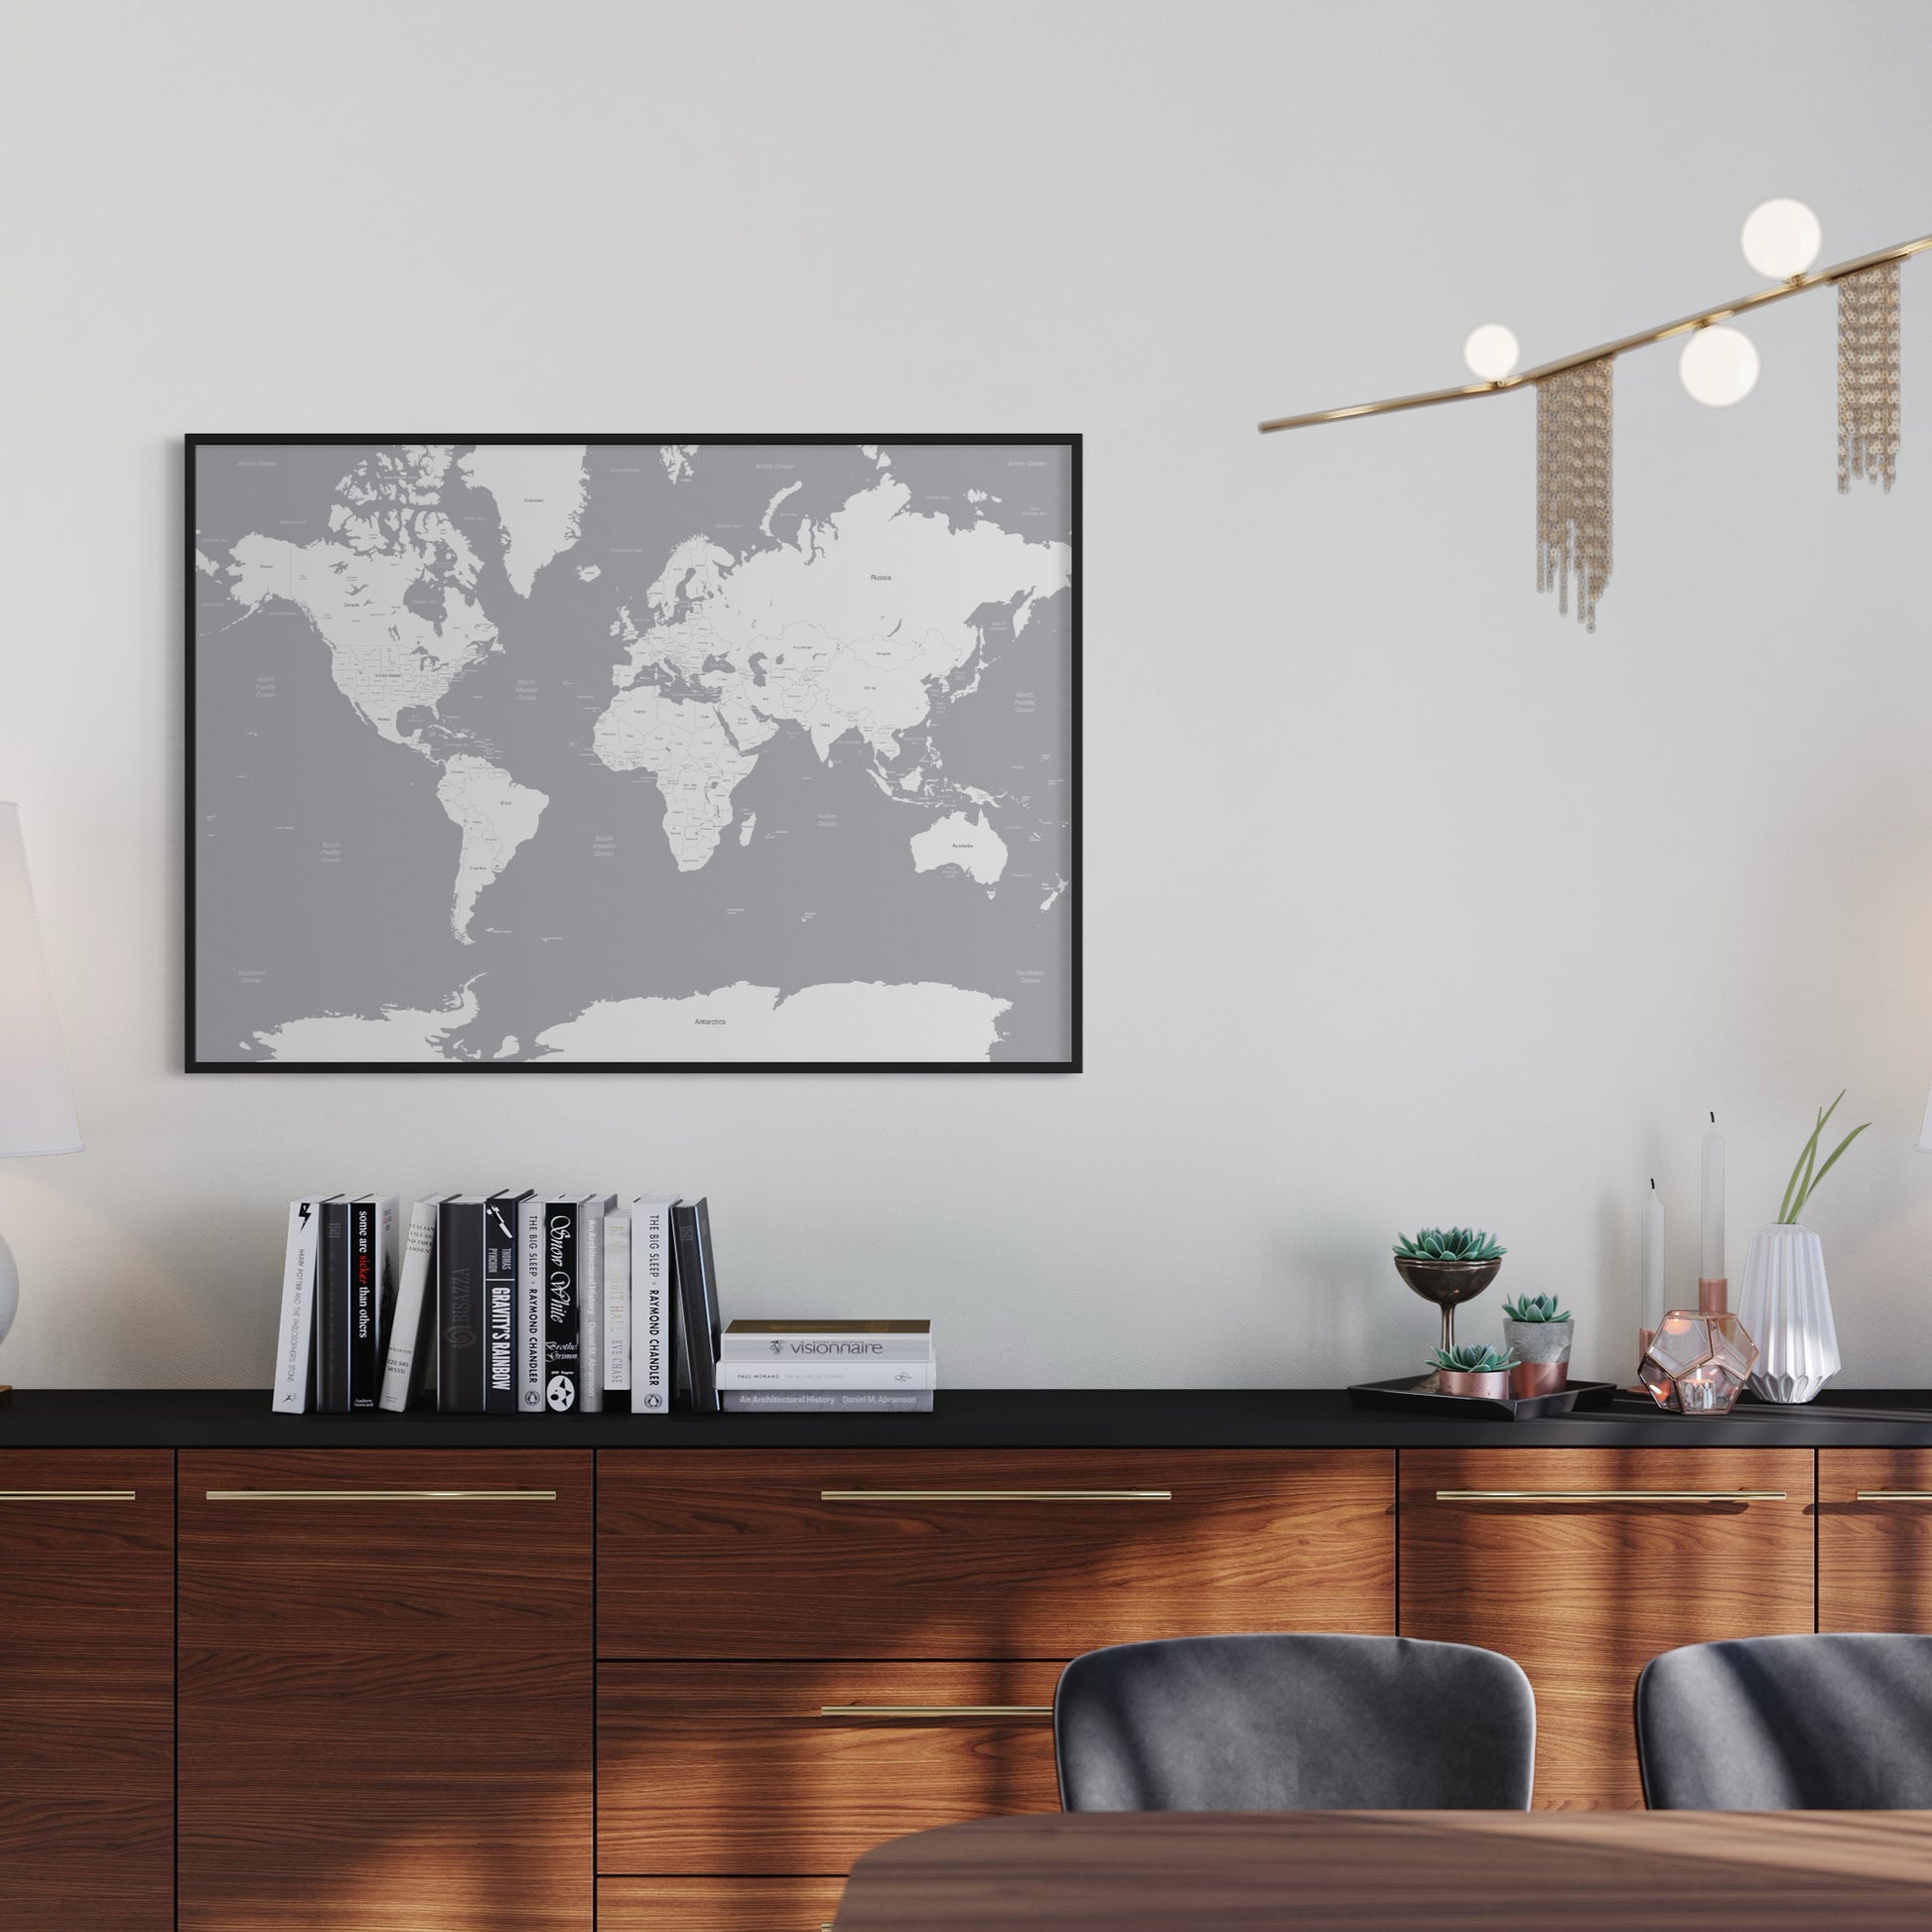 Grey and White World Map Poster Print on Wall Above Sideboard